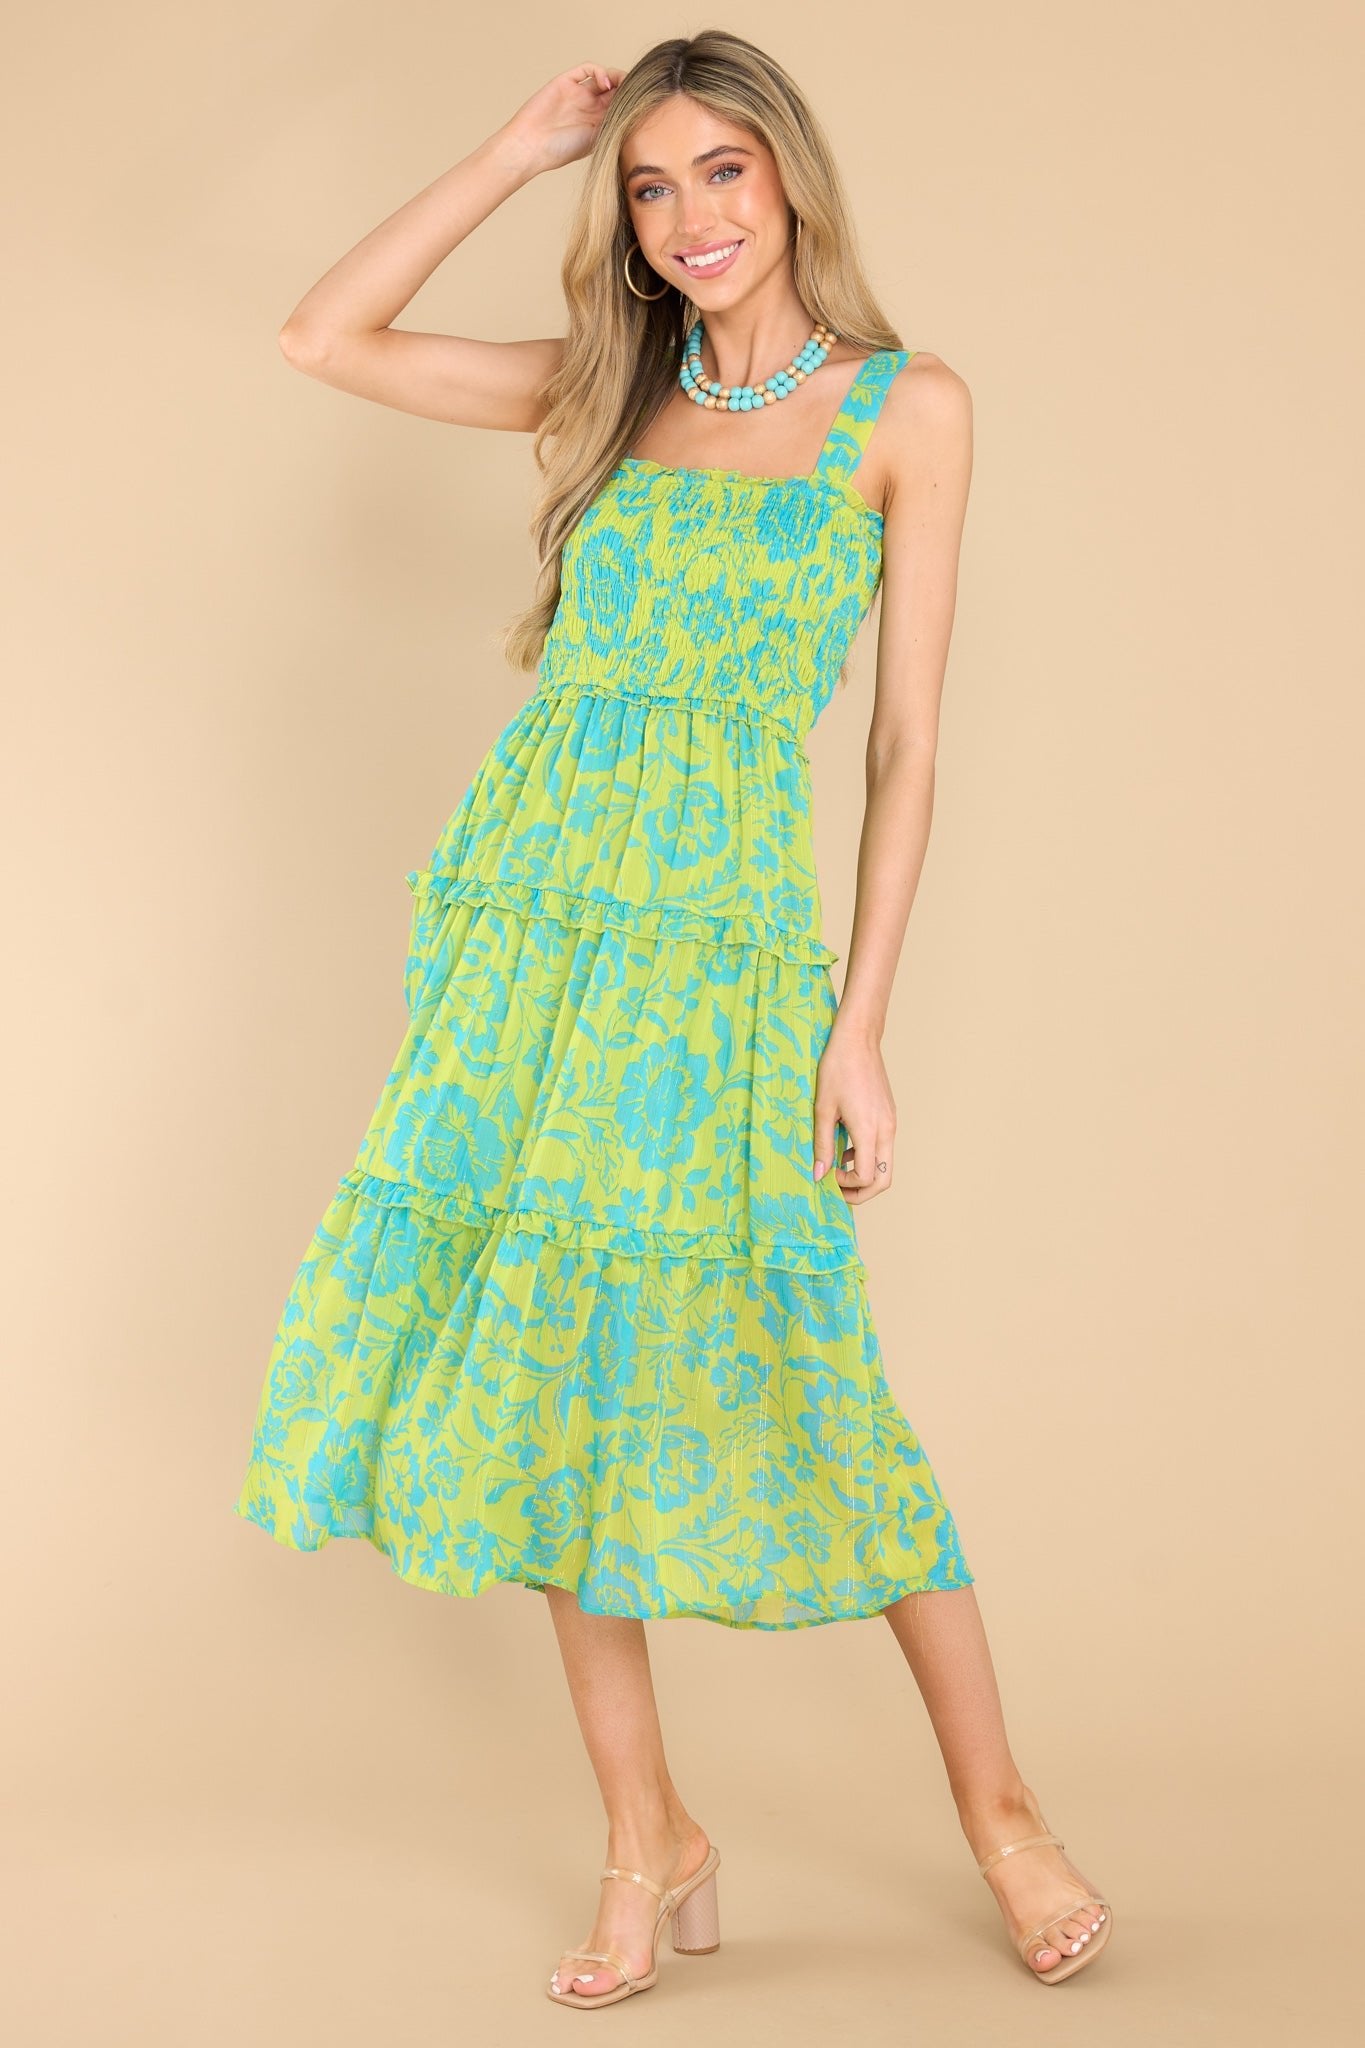 Full body view of this dress that showcases the blue floral pattern of the green fabric.